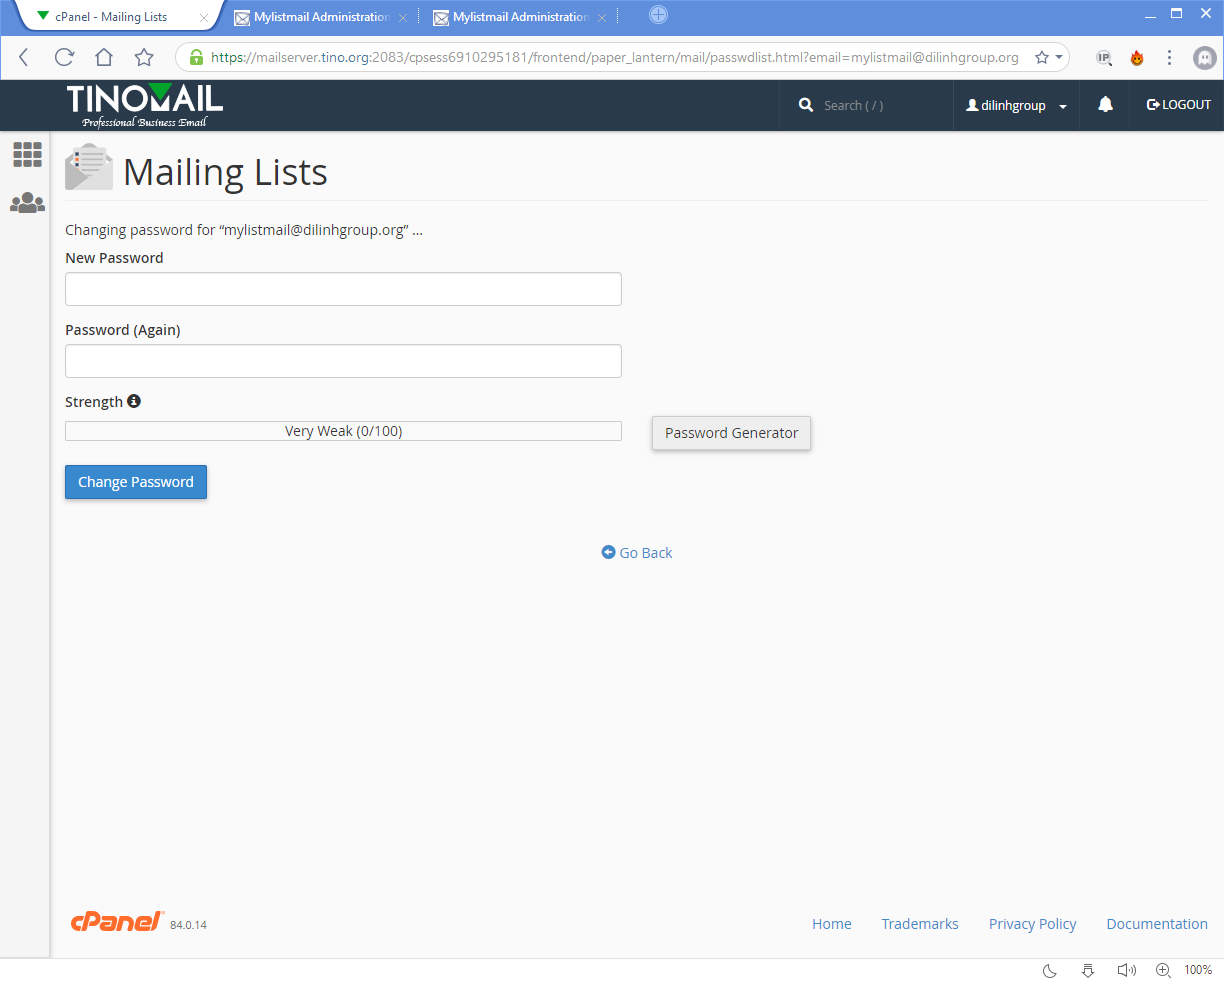 [cPanel] - Mailing Lists 7